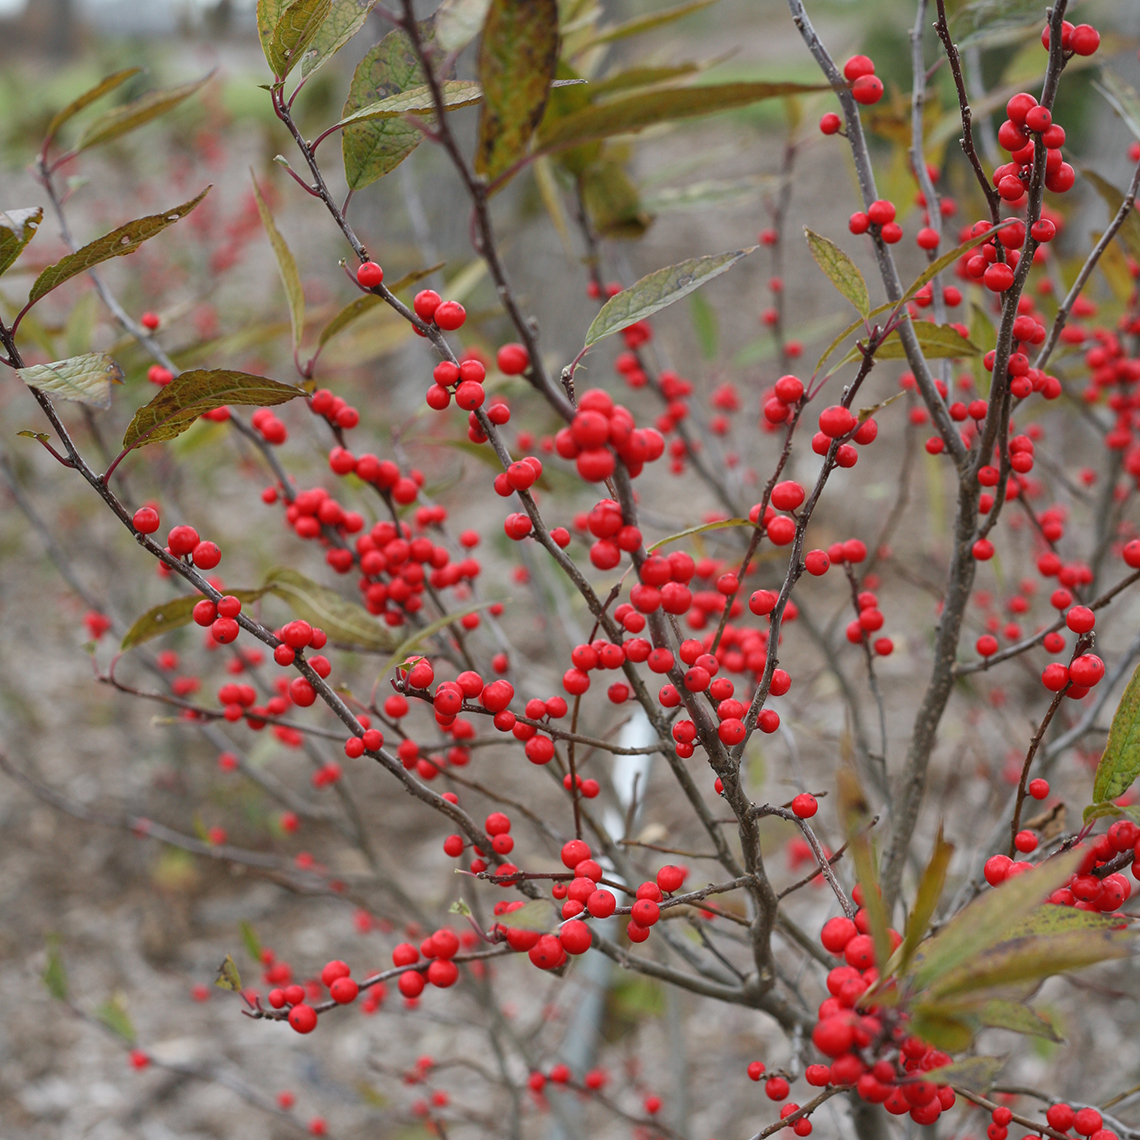 Red berries of Maryland Beauty winterberry holly in landscape